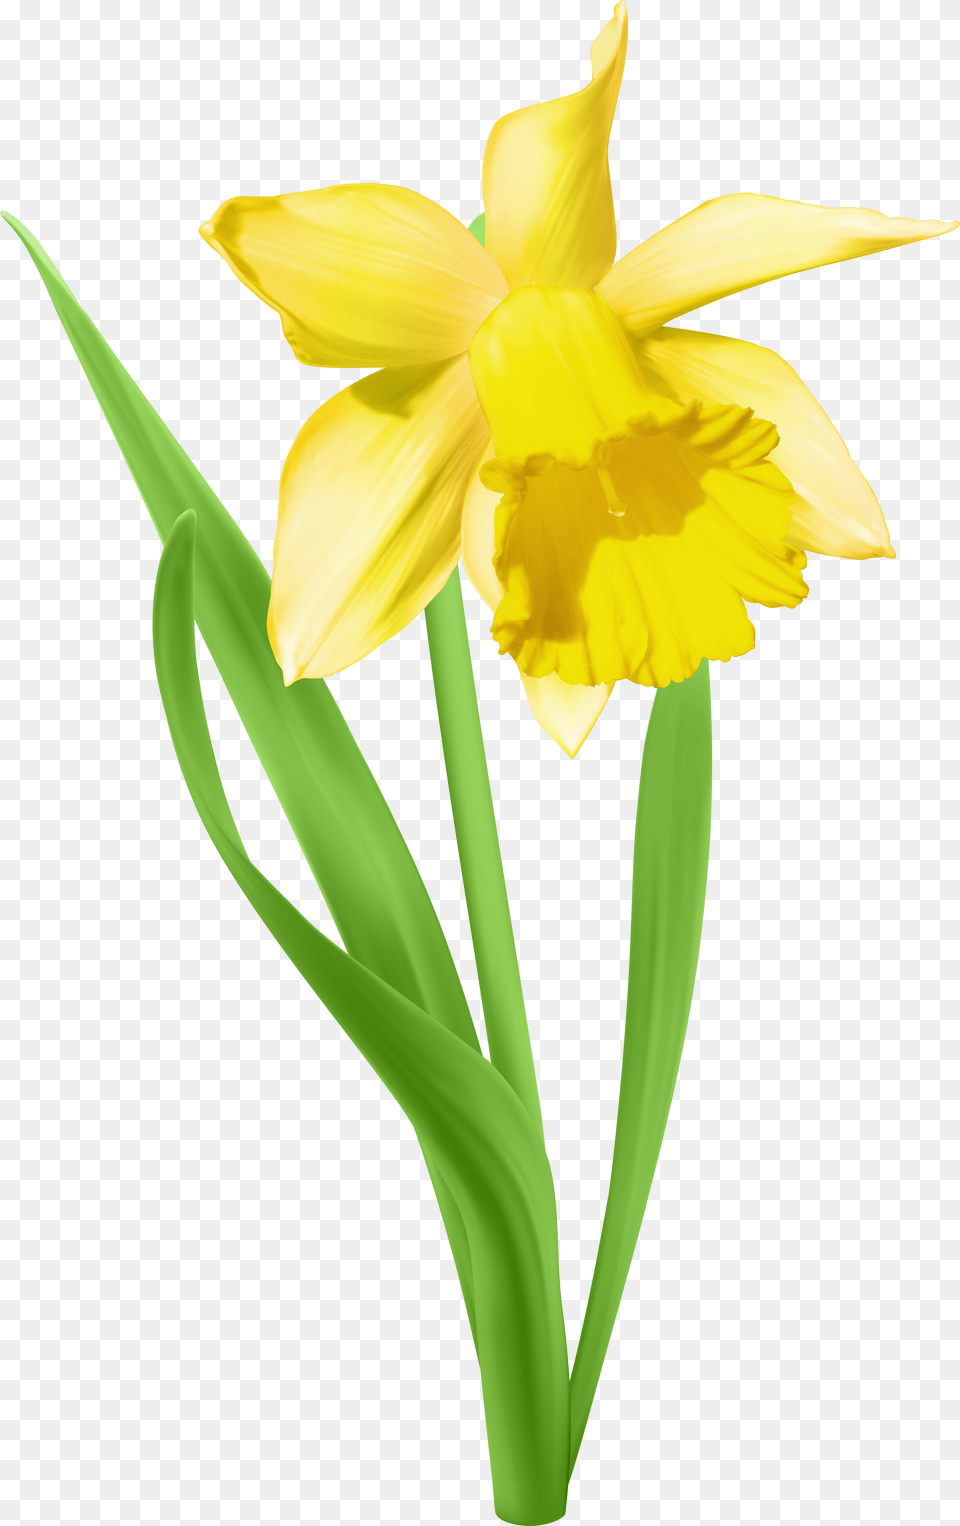 Daffodil Flower Clipart Svg Royalty Download Daffodil Transparent Background Daffodil Clip Art Free Png